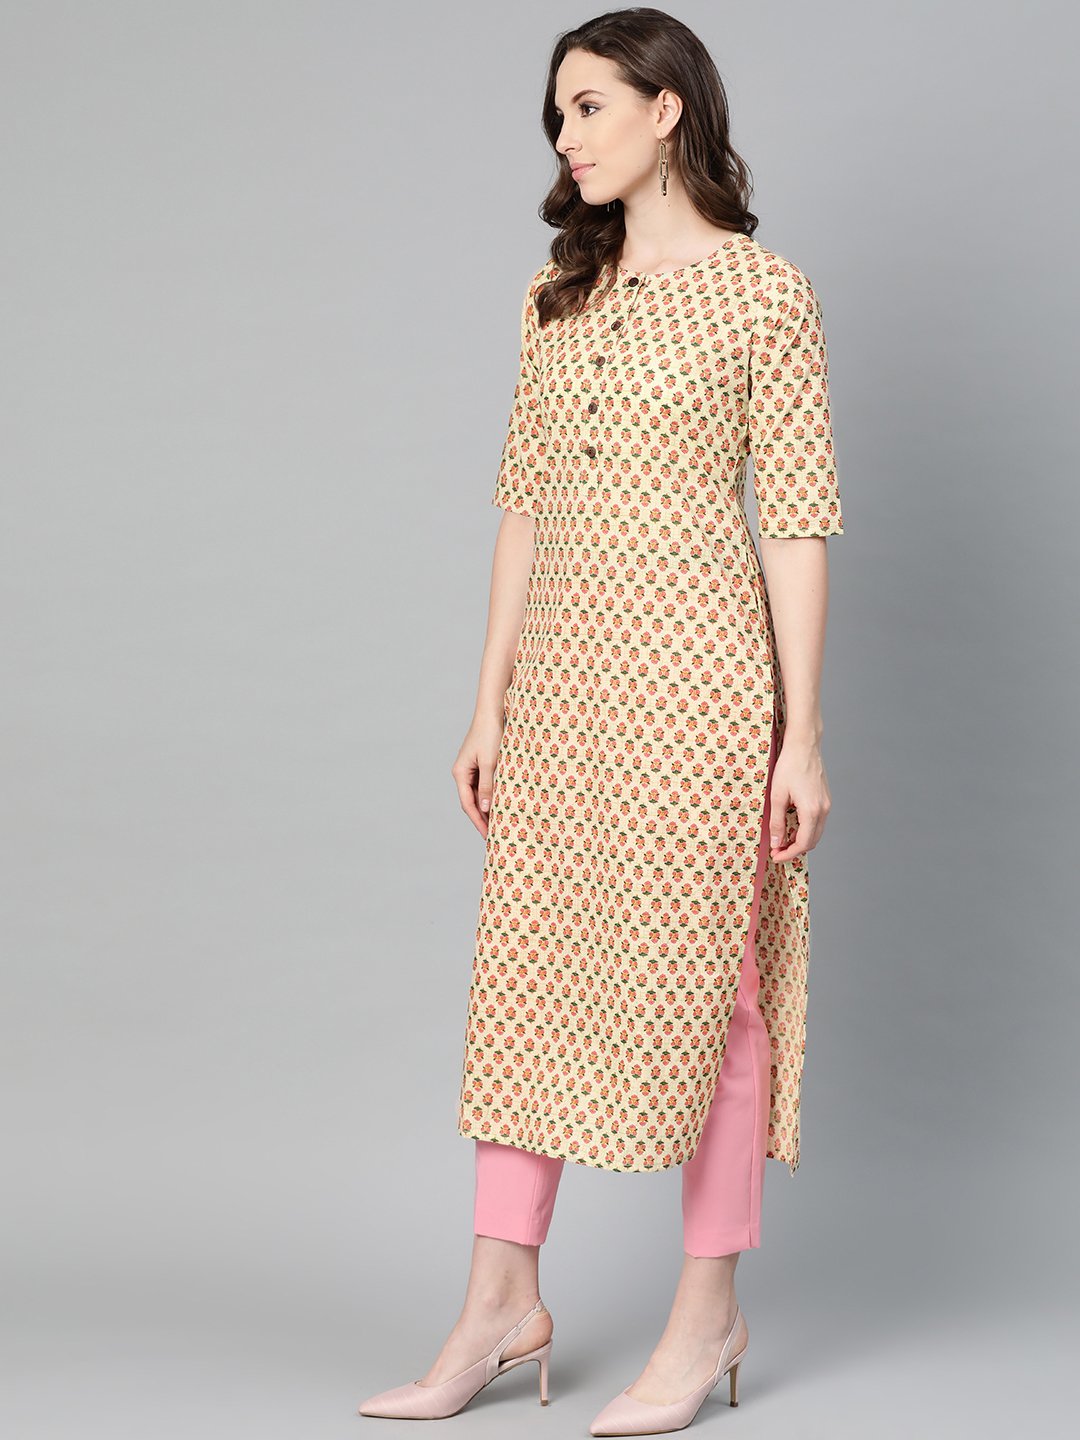 Women's Beige With Multi Floral Printed Kurta With Buttons Detailing - Nayo Clothing